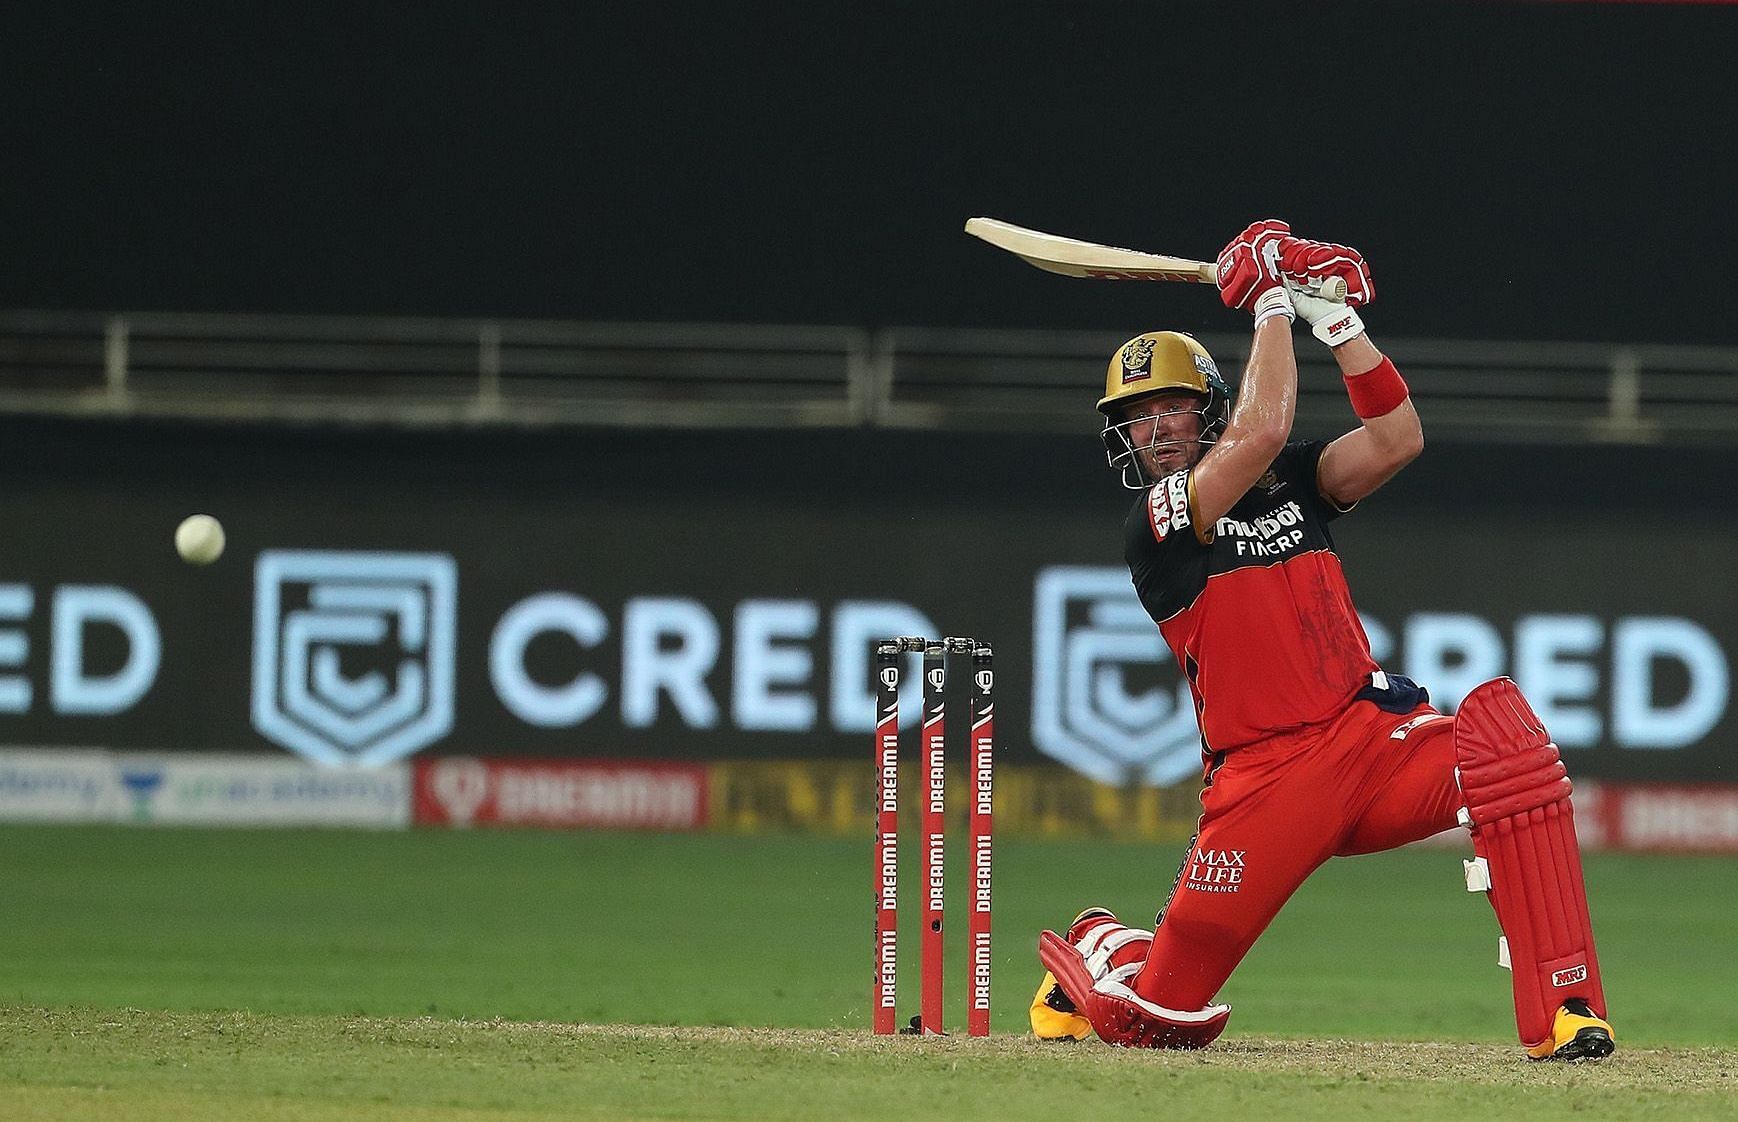 AB de Villiers of the Royal Challengers Bangalore. The match between Kings XI Punjab (KXIP) Vs Royal Challengers Bangalore (RCB) will start at 7:30 PM IST.